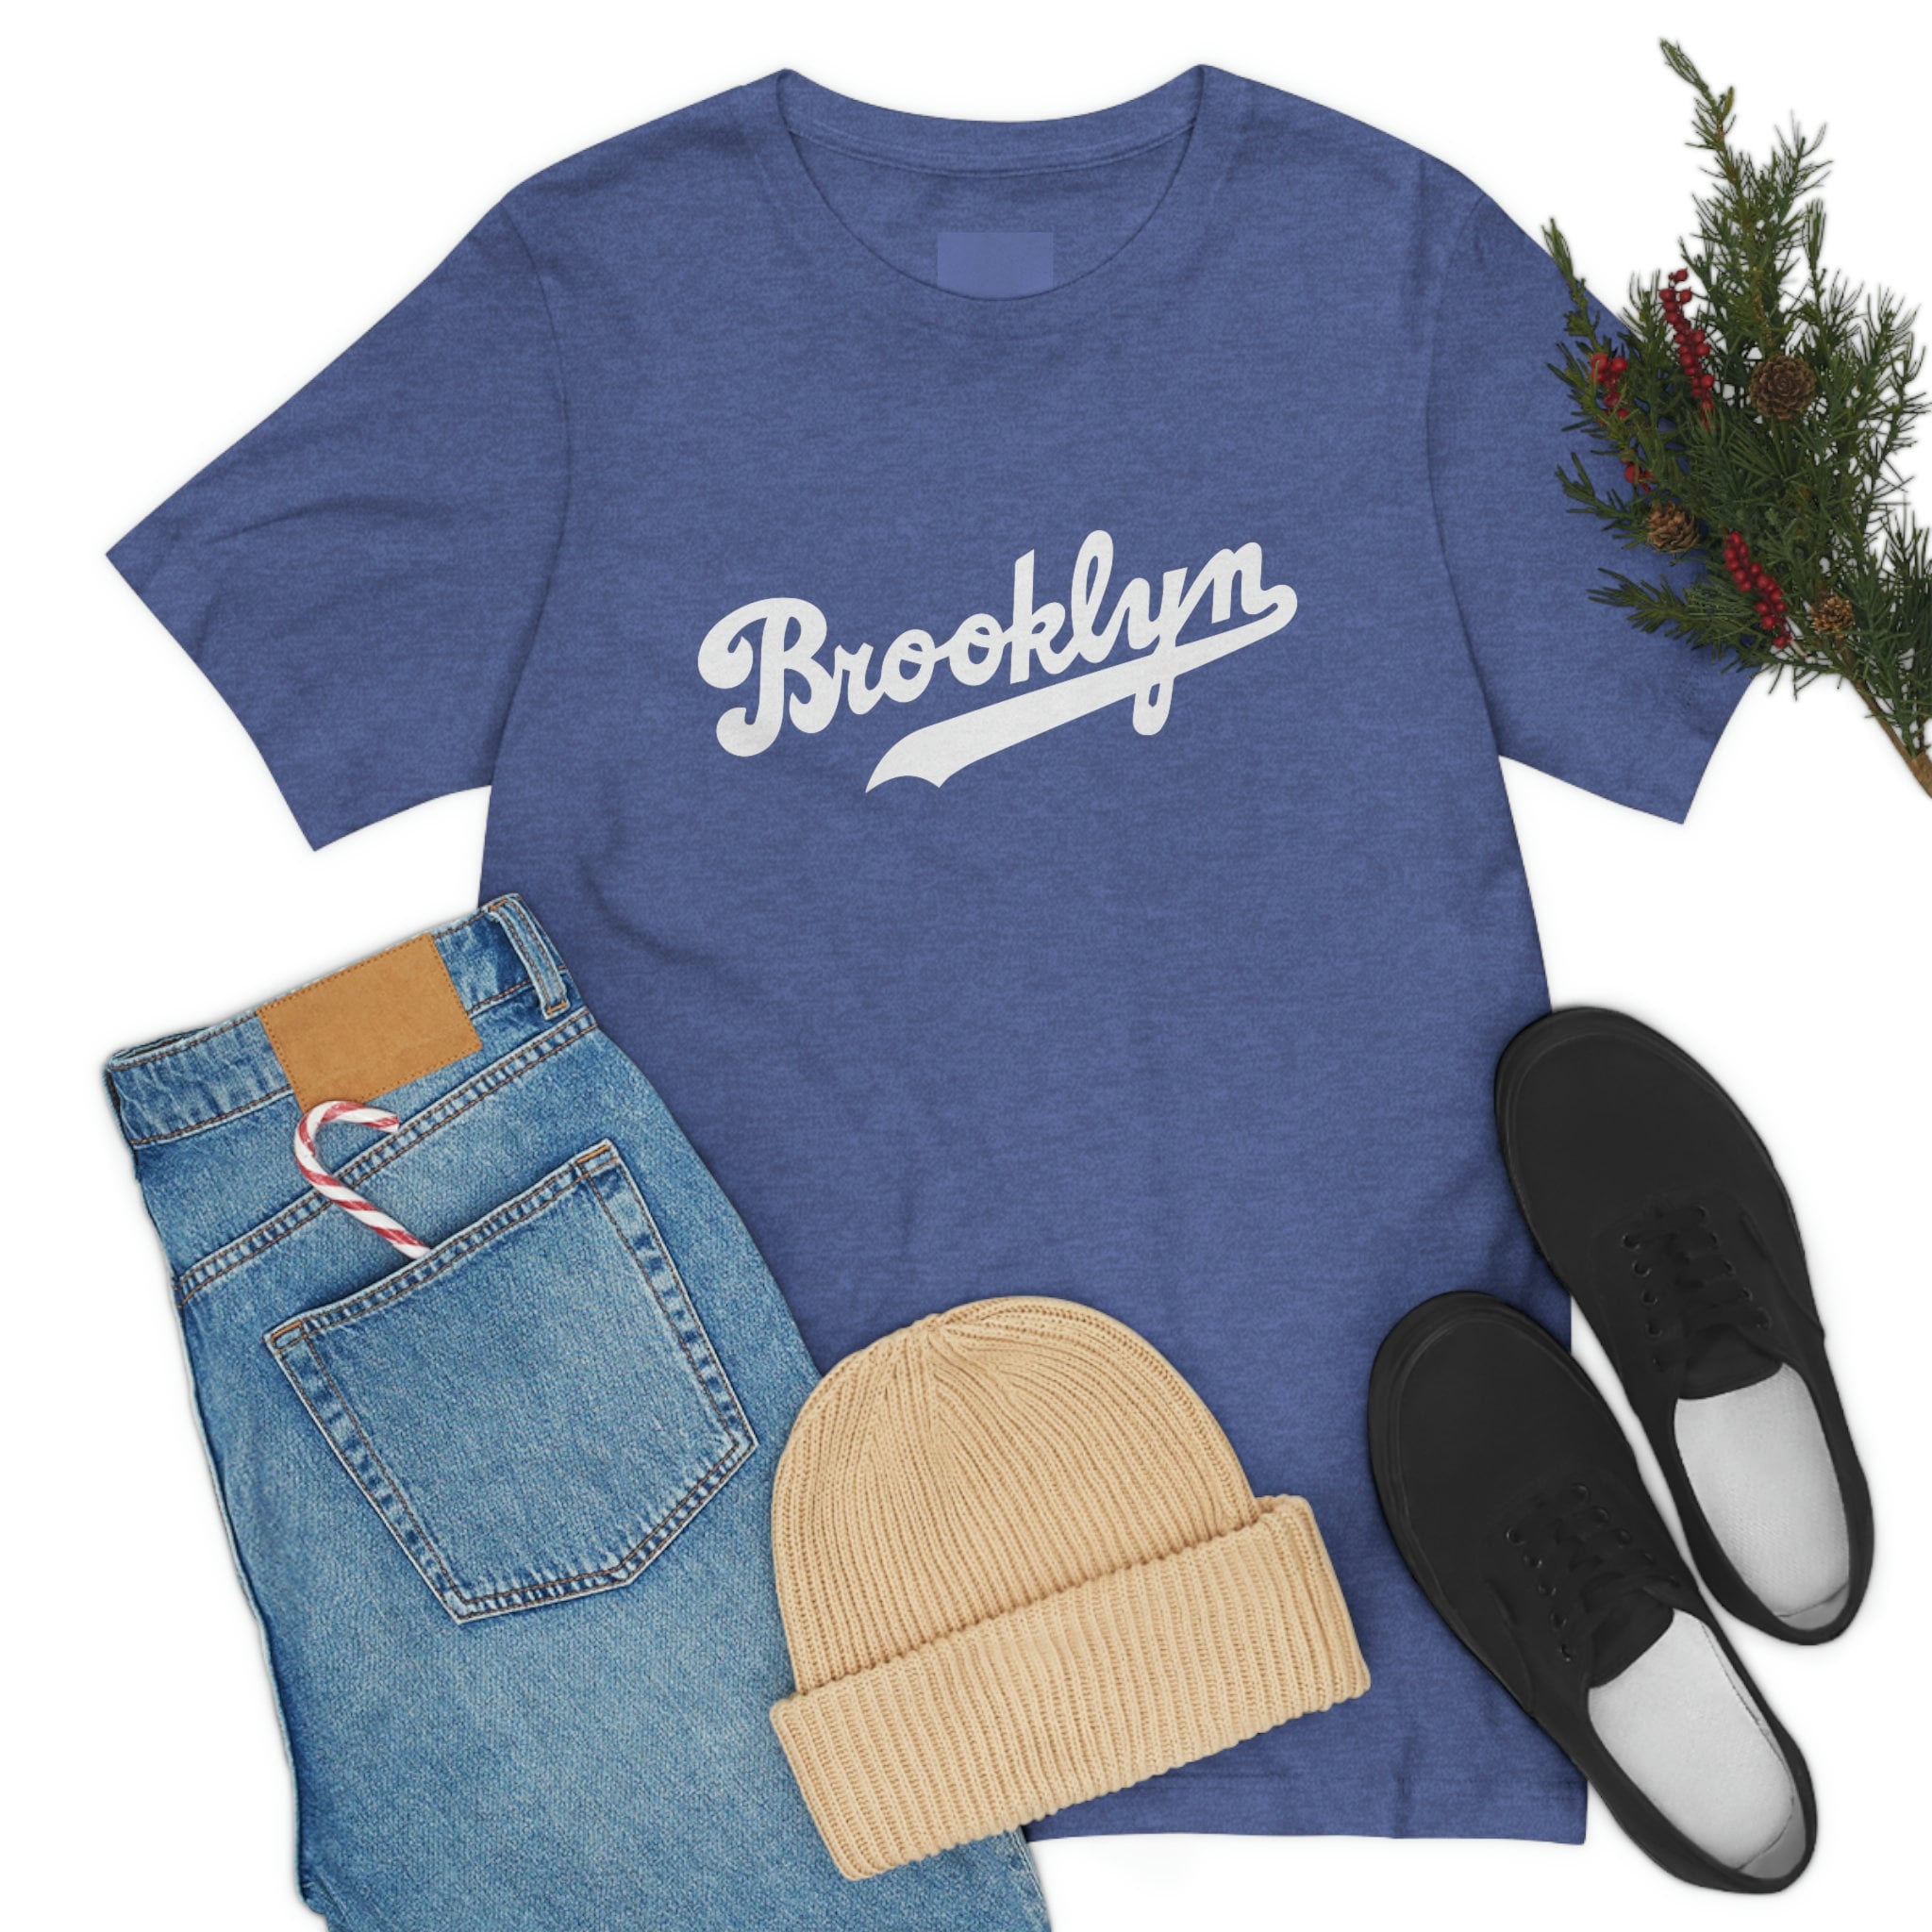 Vintage Brooklyn Dodgers T-shirt – For All To Envy